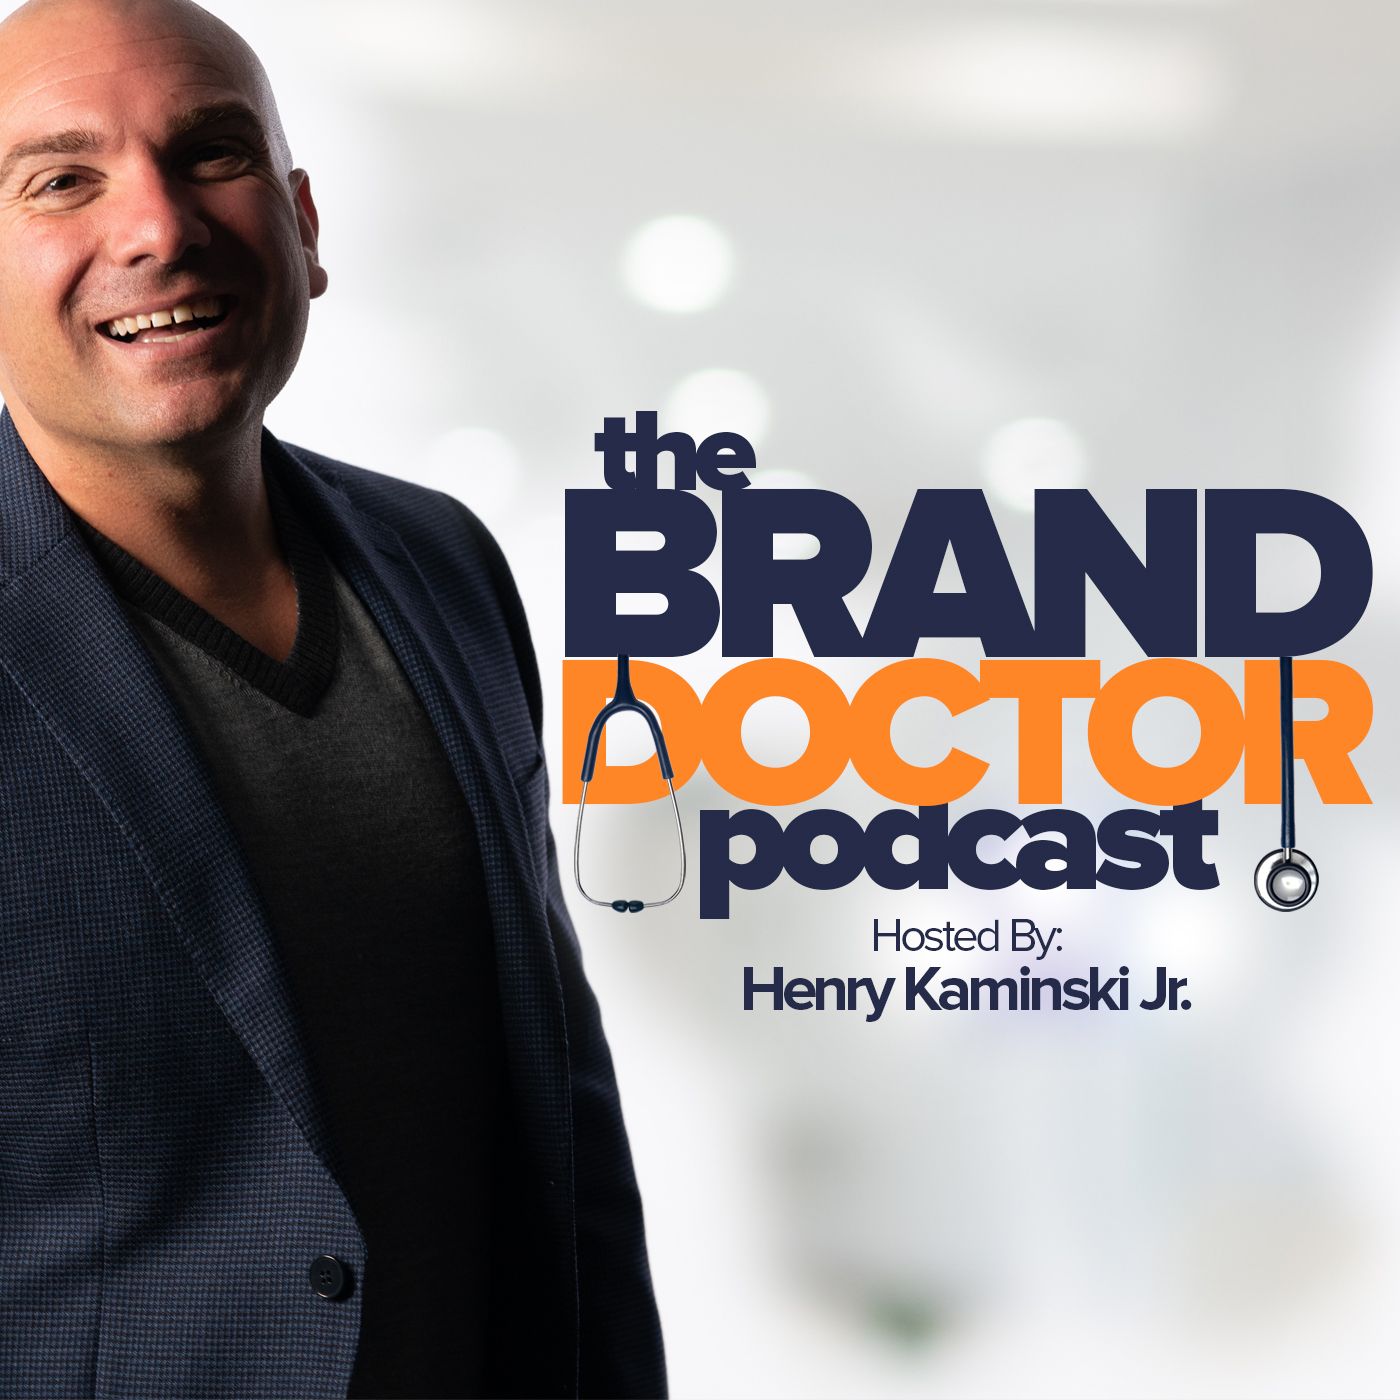 The Brand Doctor Podcast photo